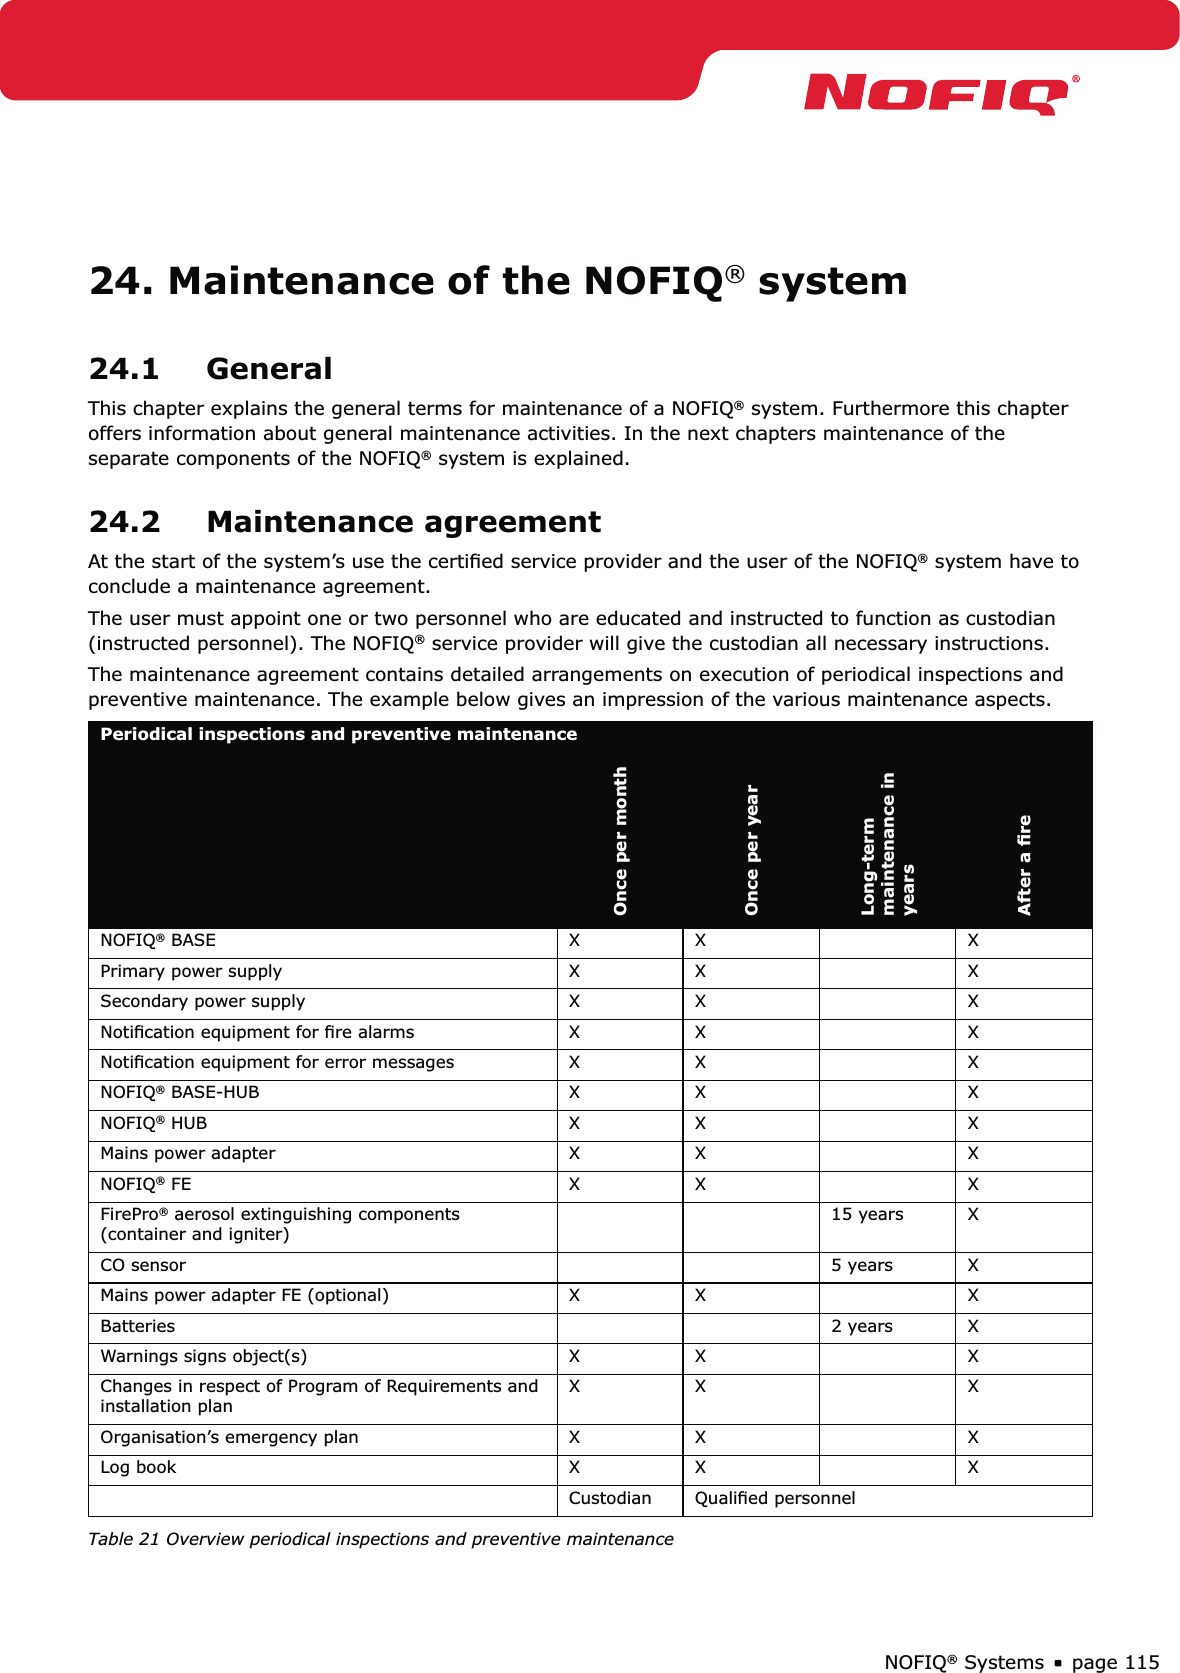 page 115NOFIQ® Systems24. Maintenance of the NOFIQ® system24.1 GeneralThis chapter explains the general terms for maintenance of a NOFIQ® system. Furthermore this chapter offers information about general maintenance activities. In the next chapters maintenance of the separate components of the NOFIQ® system is explained. 24.2 Maintenance agreementAt the start of the system’s use the certiﬁed service provider and the user of the NOFIQ® system have to conclude a maintenance agreement.The user must appoint one or two personnel who are educated and instructed to function as custodian (instructed personnel). The NOFIQ® service provider will give the custodian all necessary instructions. The maintenance agreement contains detailed arrangements on execution of periodical inspections and preventive maintenance. The example below gives an impression of the various maintenance aspects.Periodical inspections and preventive maintenanceOnce per monthOnce per yearLong-term maintenance in yearsAfter a ﬁreNOFIQ® BASE  X X XPrimary power supply  X X XSecondary power supply X X XNotiﬁcation equipment for ﬁre alarms X X XNotiﬁcation equipment for error messages  X X XNOFIQ® BASE-HUB X X XNOFIQ® HUB X X XMains power adapter X X XNOFIQ® FE X X XFirePro® aerosol extinguishing components (container and igniter)15 years XCO sensor 5 years XMains power adapter FE (optional) X X XBatteries 2 years XWarnings signs object(s) X X XChanges in respect of Program of Requirements and installation plan XX XOrganisation’s emergency plan X X XLog book X X XCustodian Qualiﬁed personnelTable 21 Overview periodical inspections and preventive maintenance